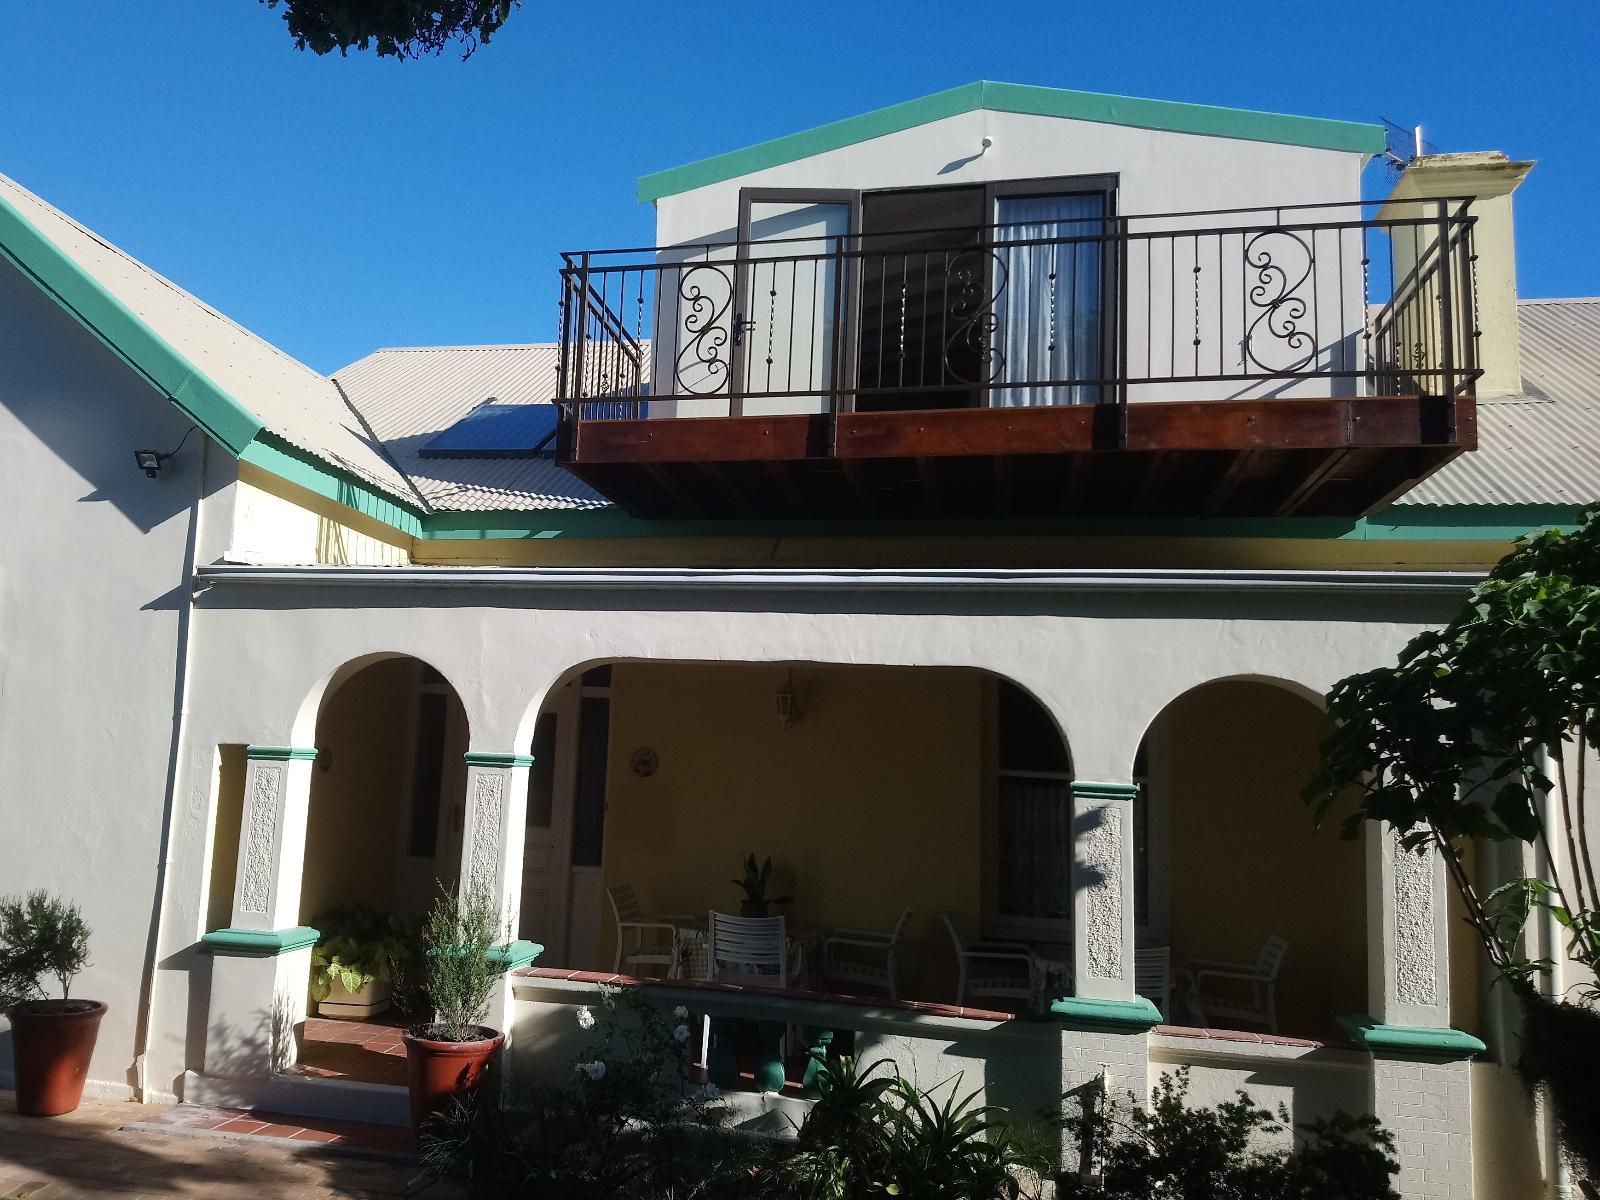 Welterusten Guesthouse Strand Western Cape South Africa Balcony, Architecture, House, Building, Palm Tree, Plant, Nature, Wood